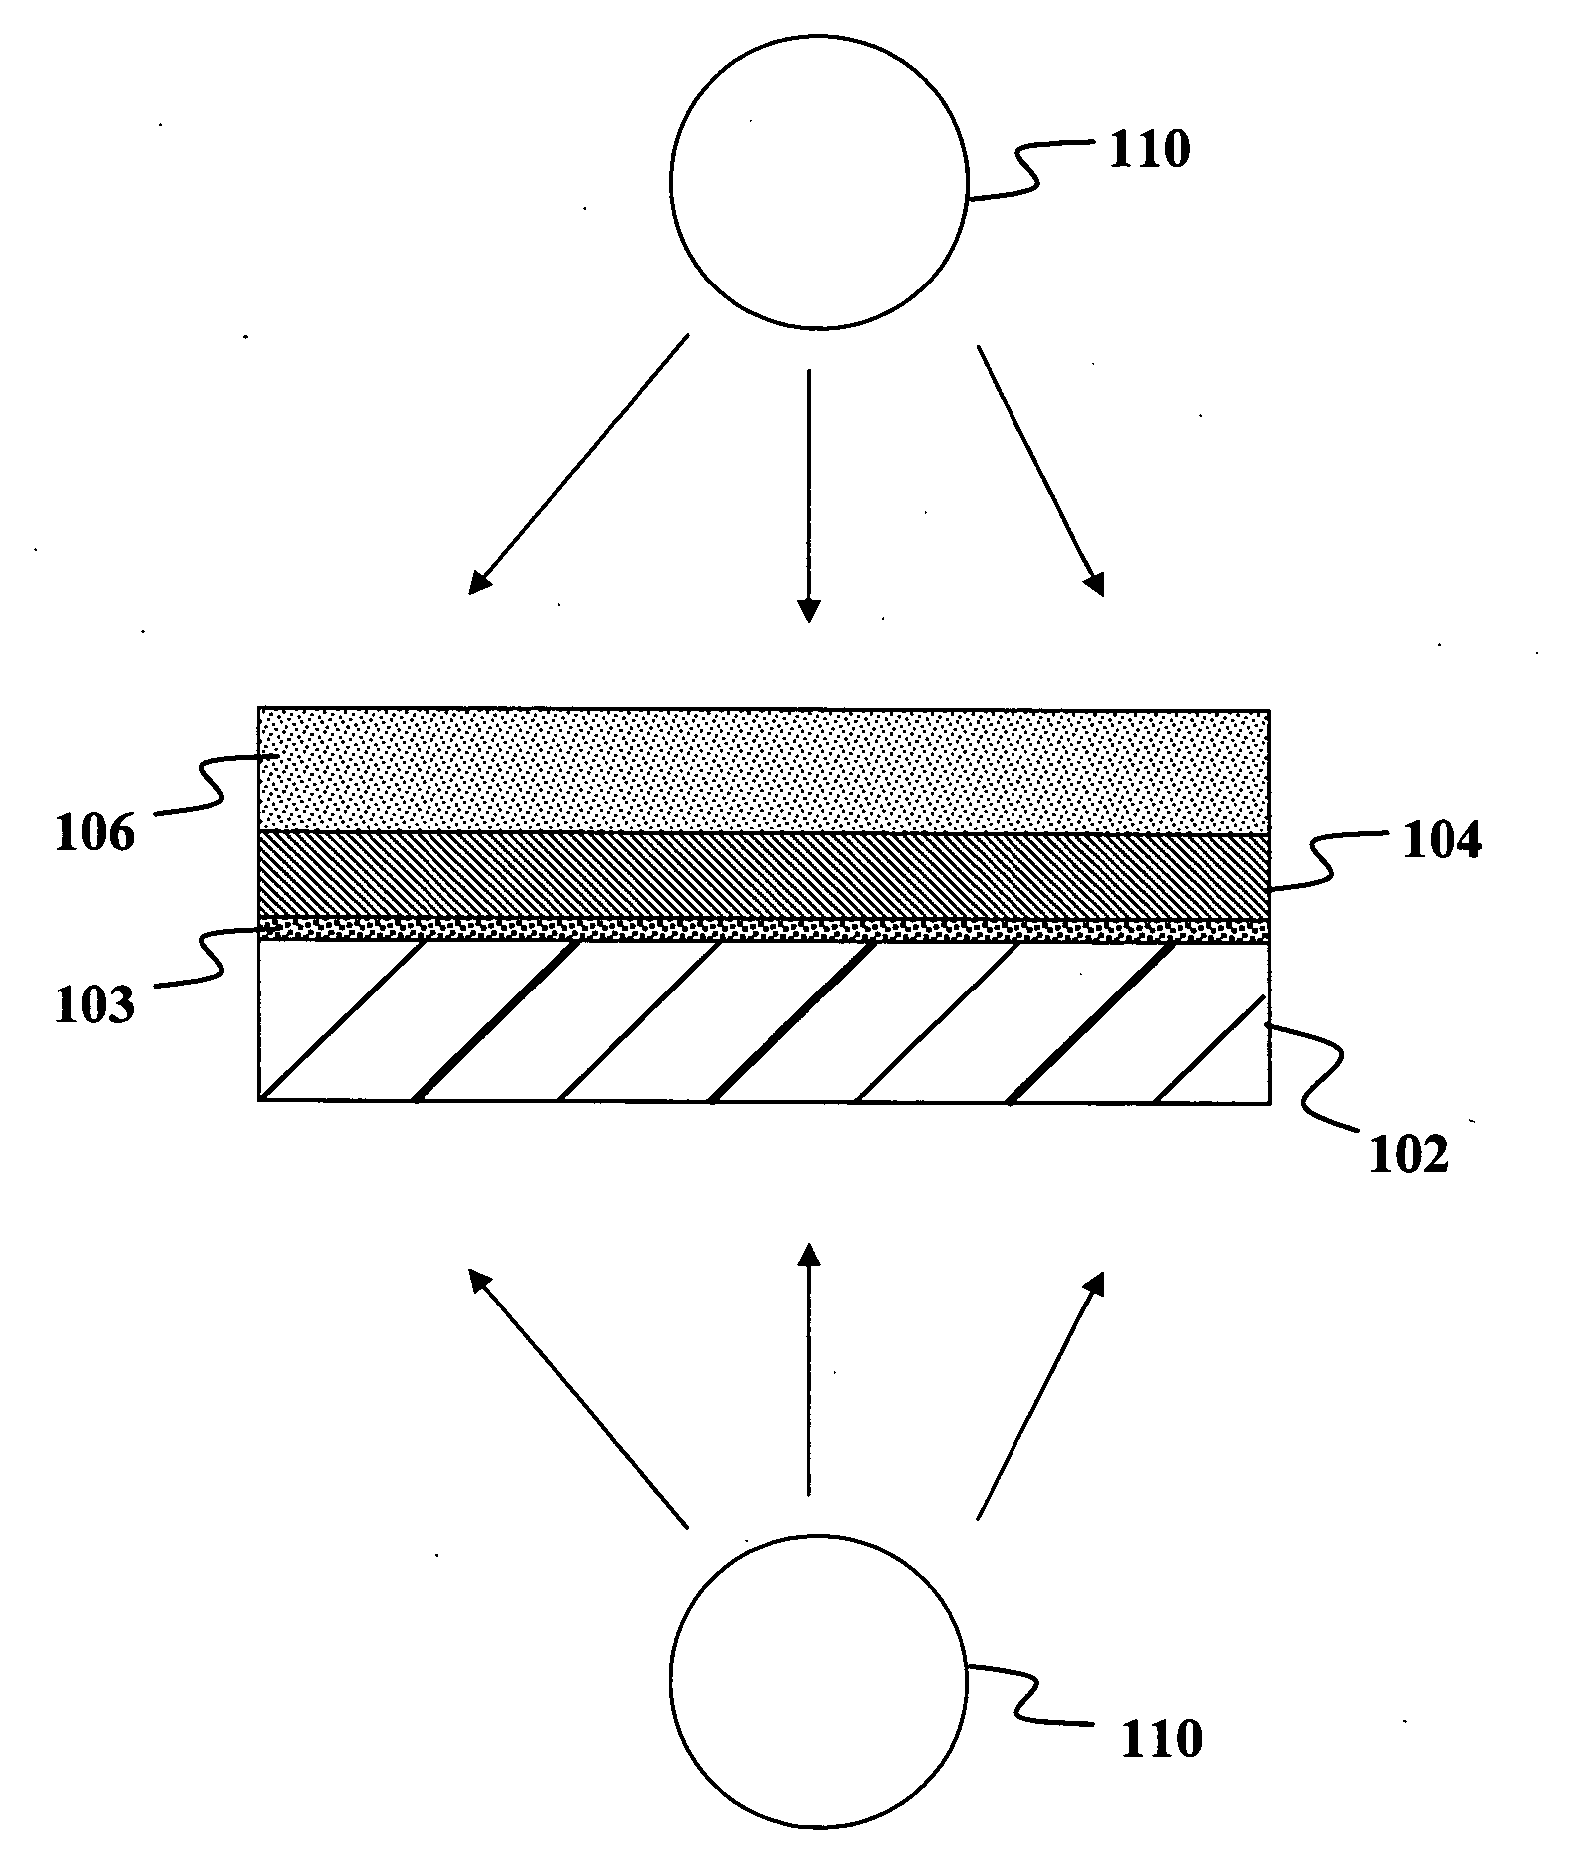 Formation of solar cells on foil substrates